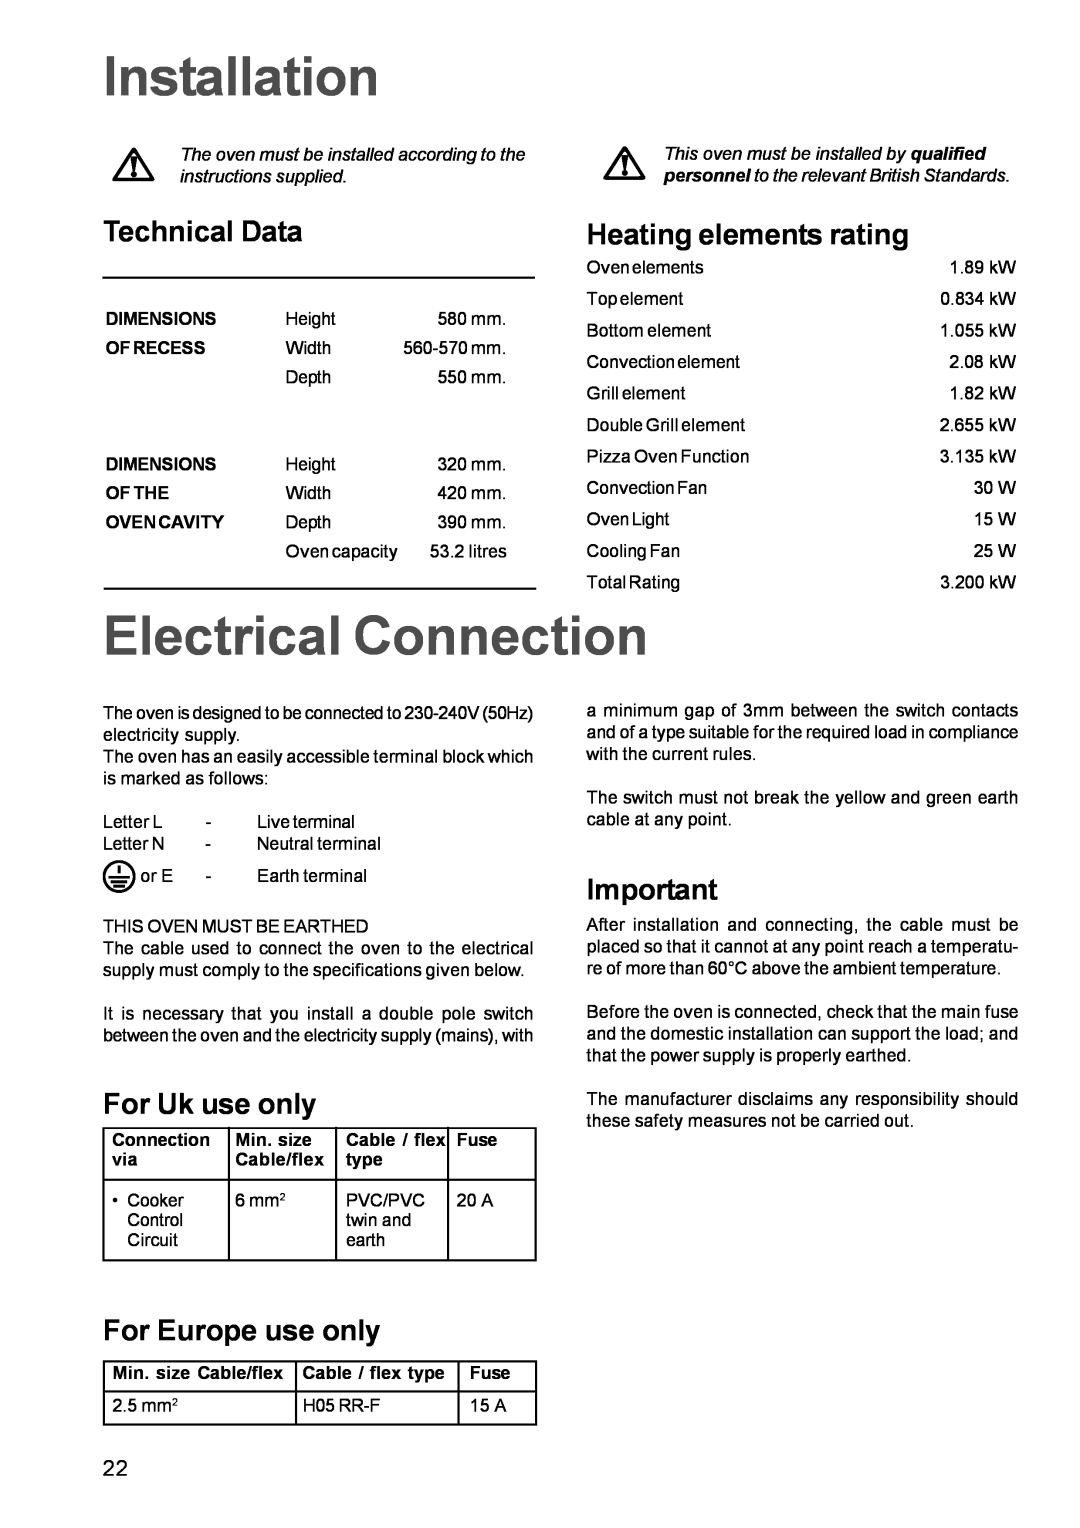 Zanussi ZBM 972 manual Installation, Electrical Connection, Technical Data, Heating elements rating, For Uk use only 